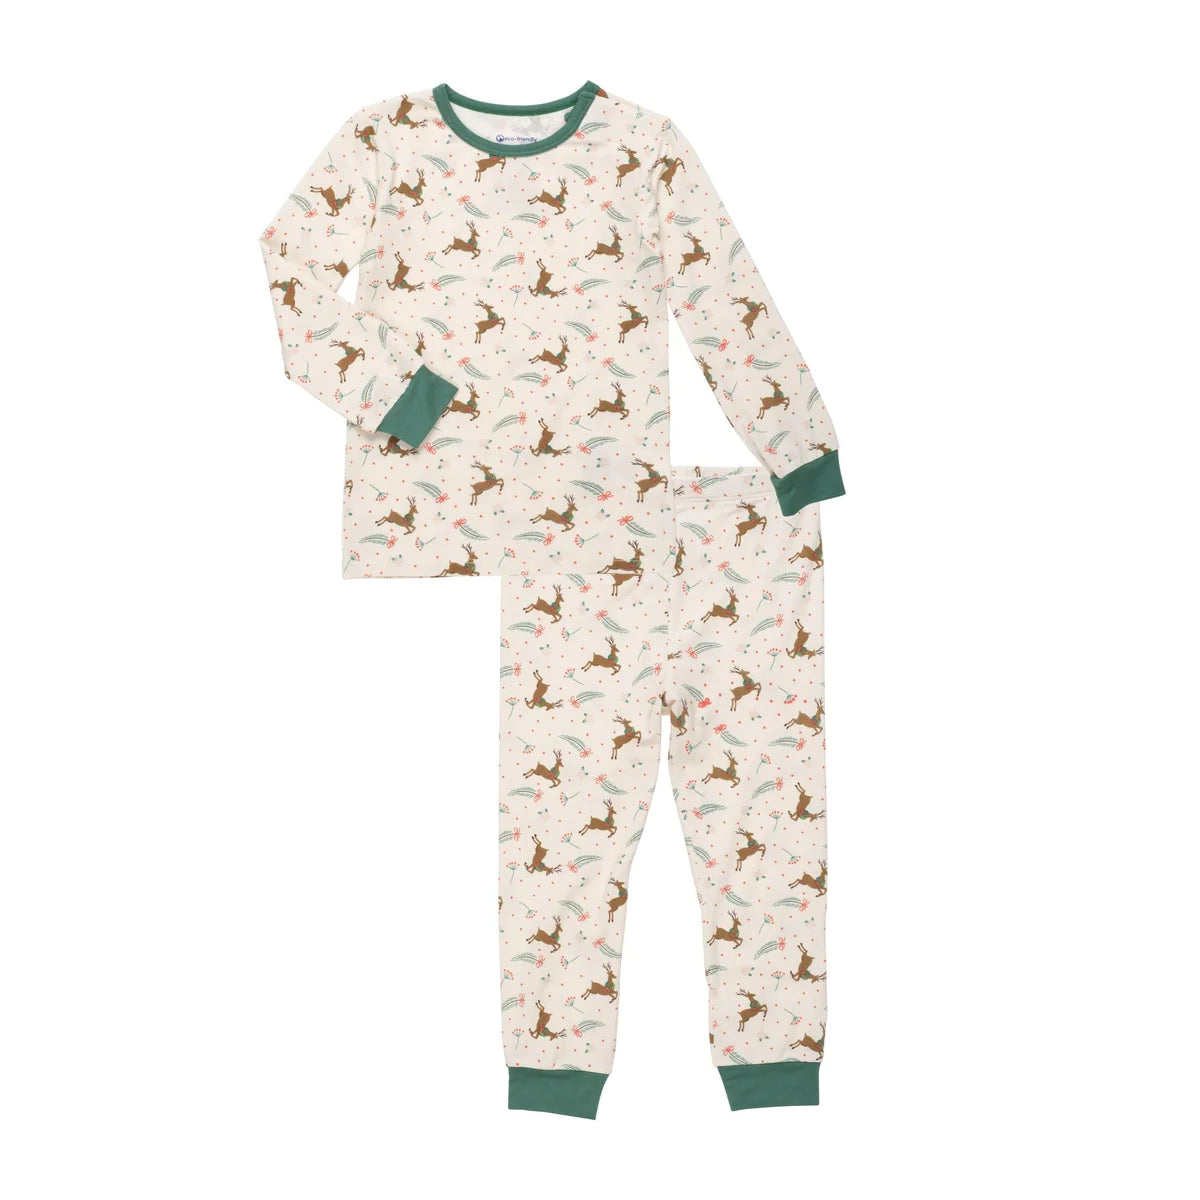 Modal 2 PC Pajamas in Merry and Bright